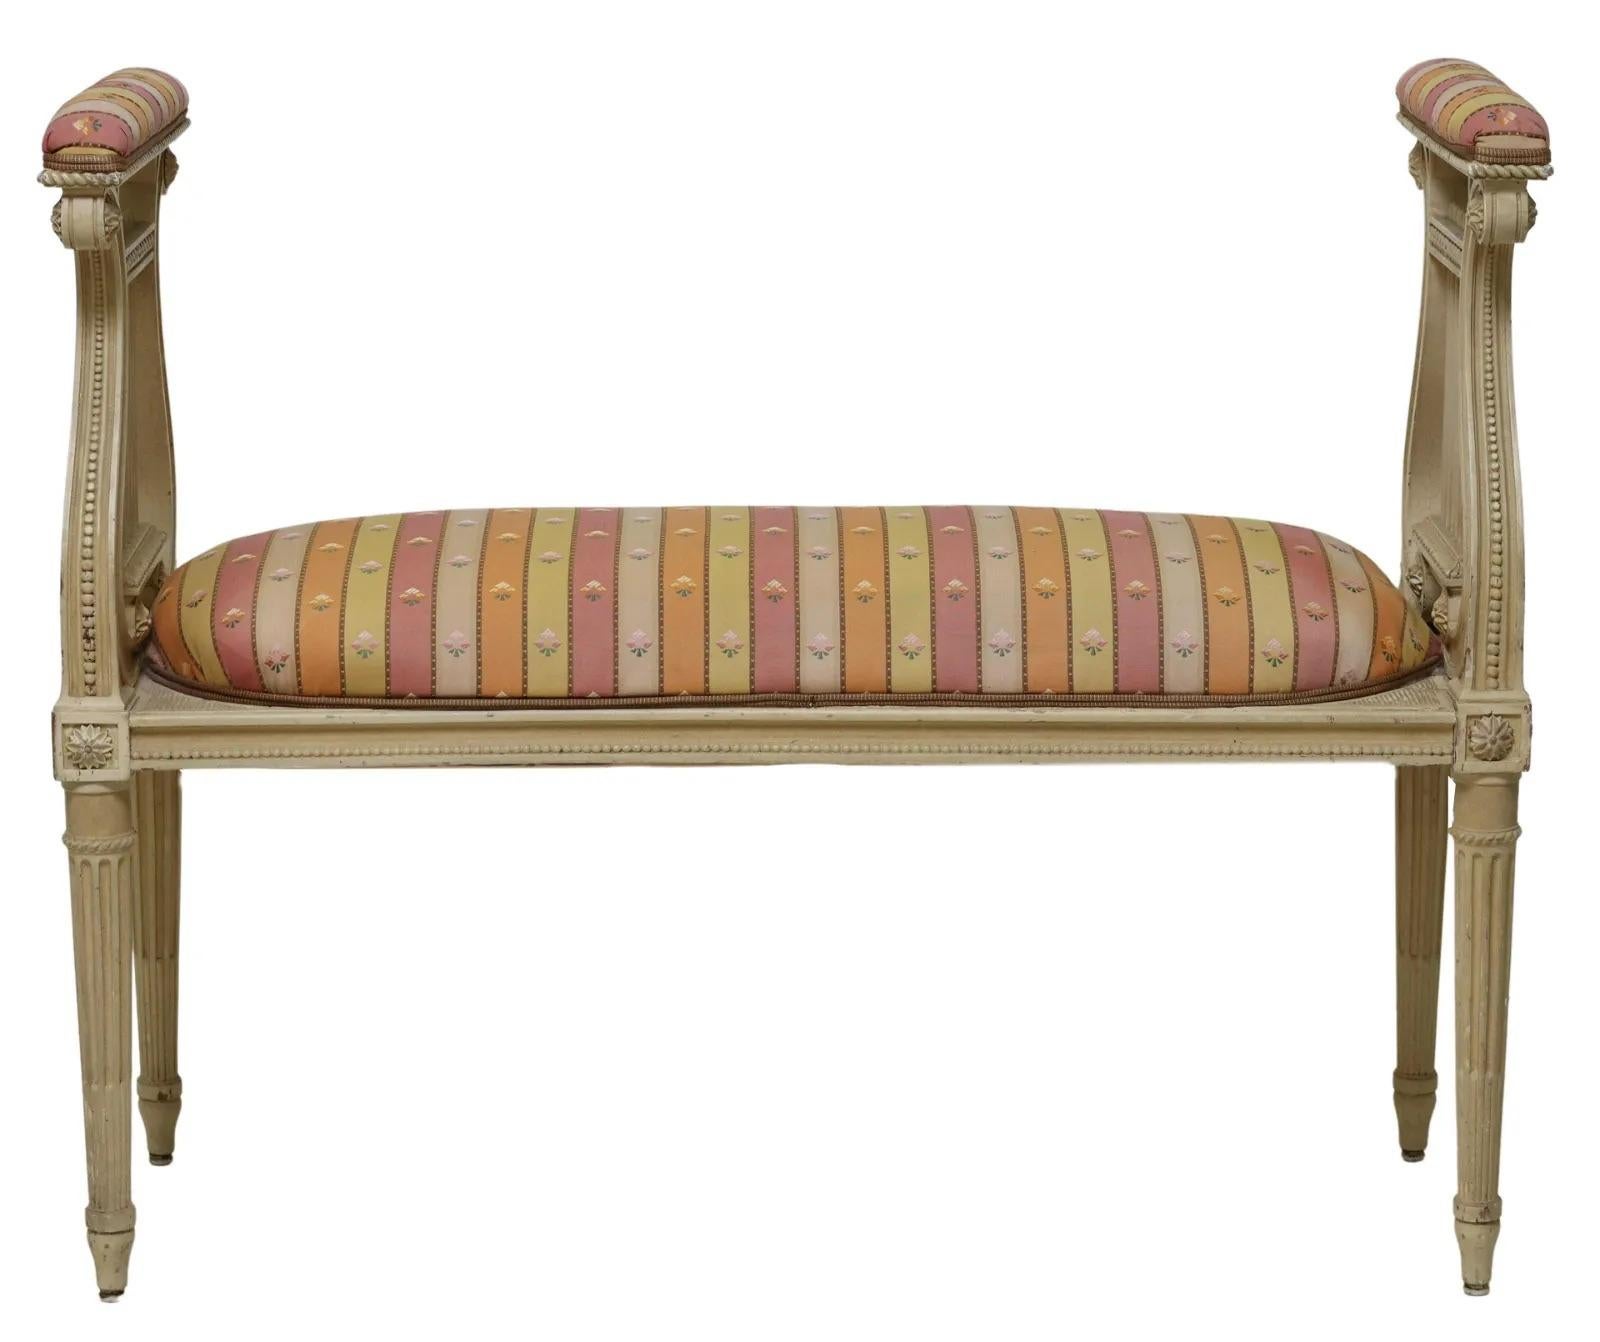 Louis XVI style music or end of bed bench, 20th c., painted in a cream color with two high lyre ends flanking the padded upholstered seat, all rising on tapered ribbed legs.

Dimensions: approx. 32.5